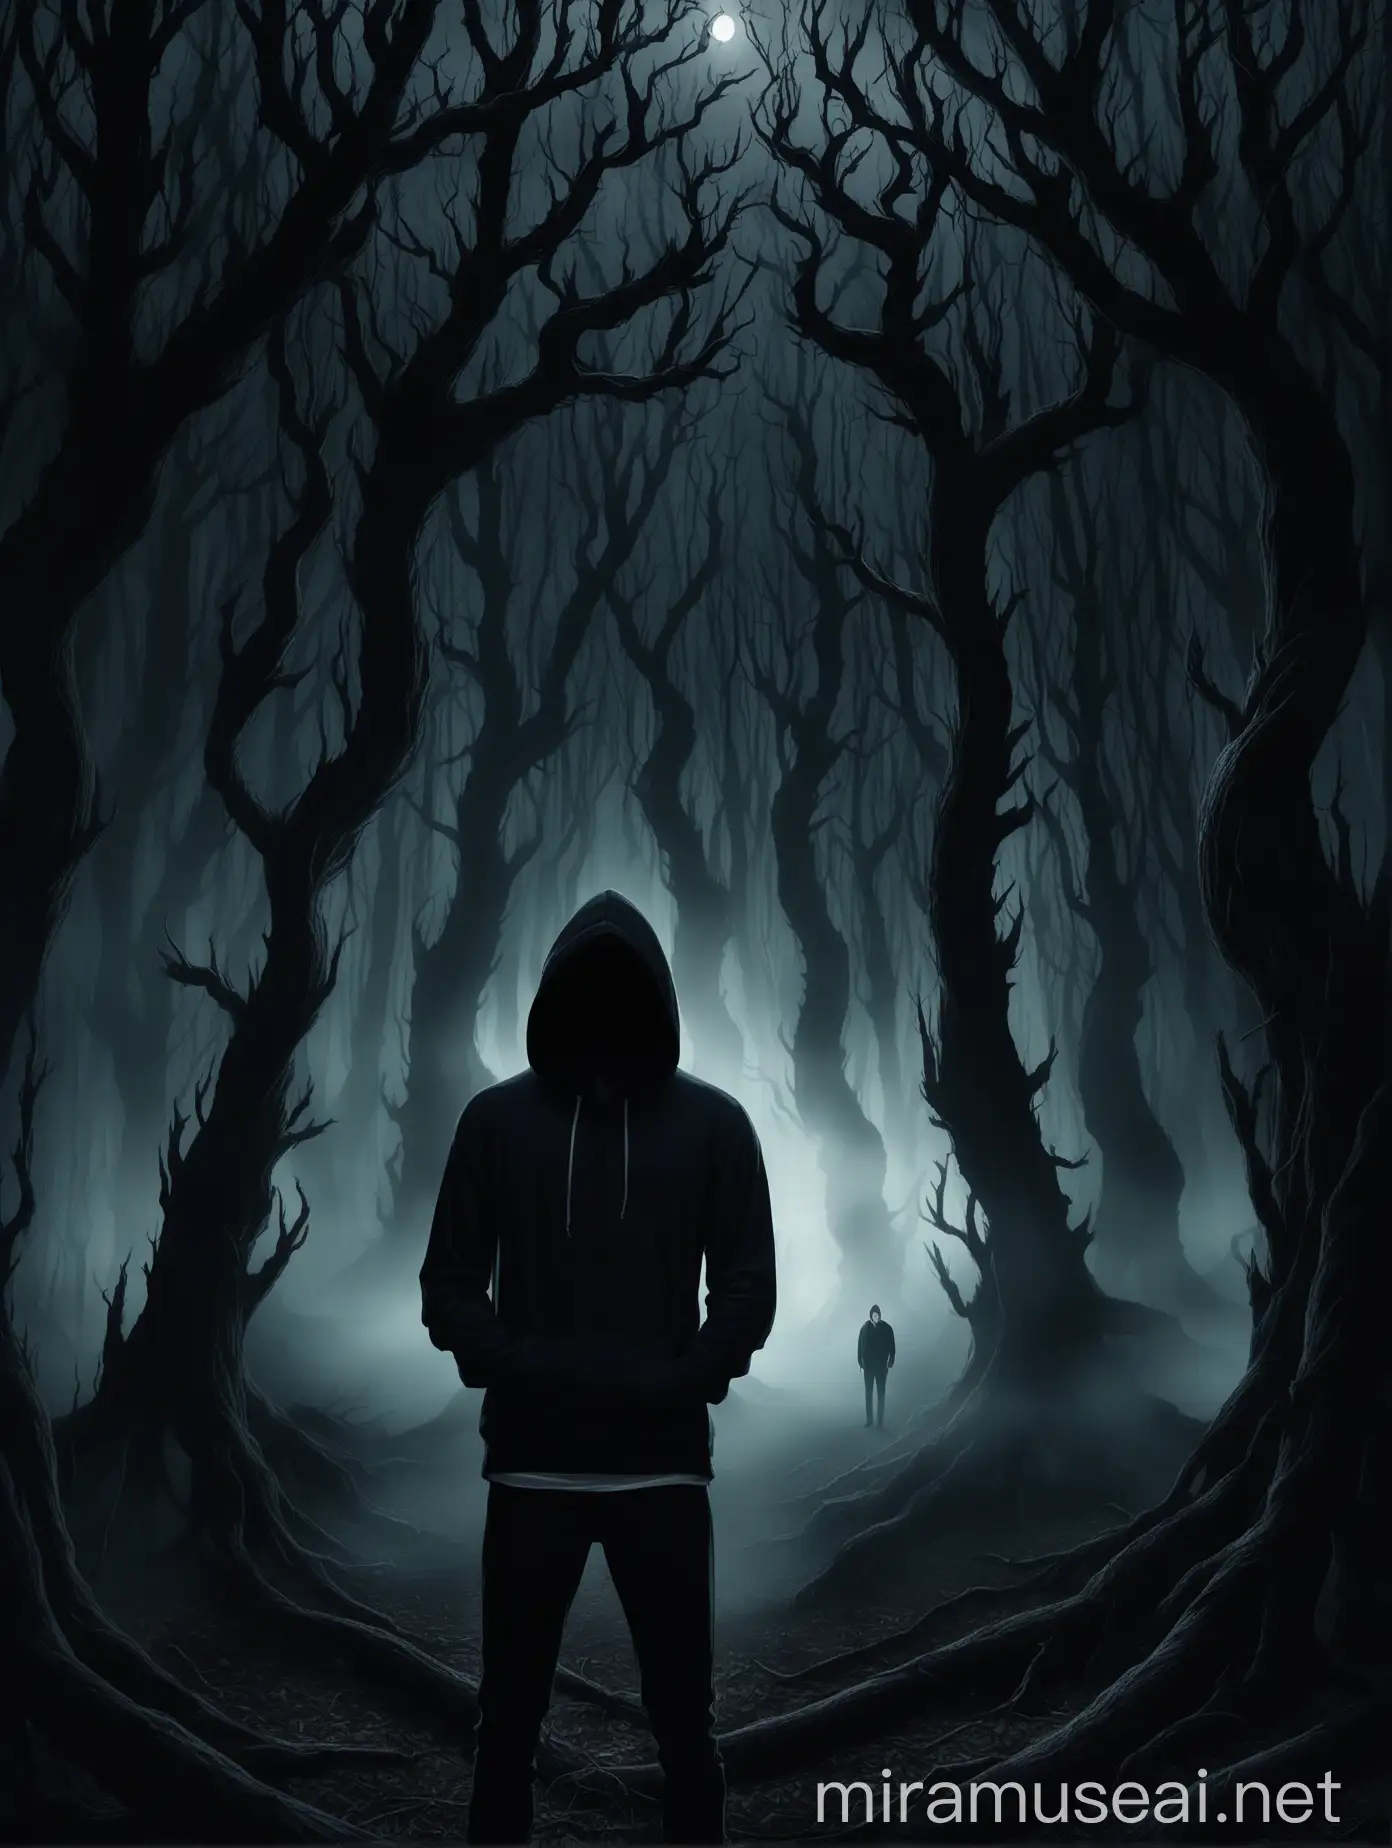 Brave Young Man in Dark Hoodie Confronts Eerie Forest at Midnight